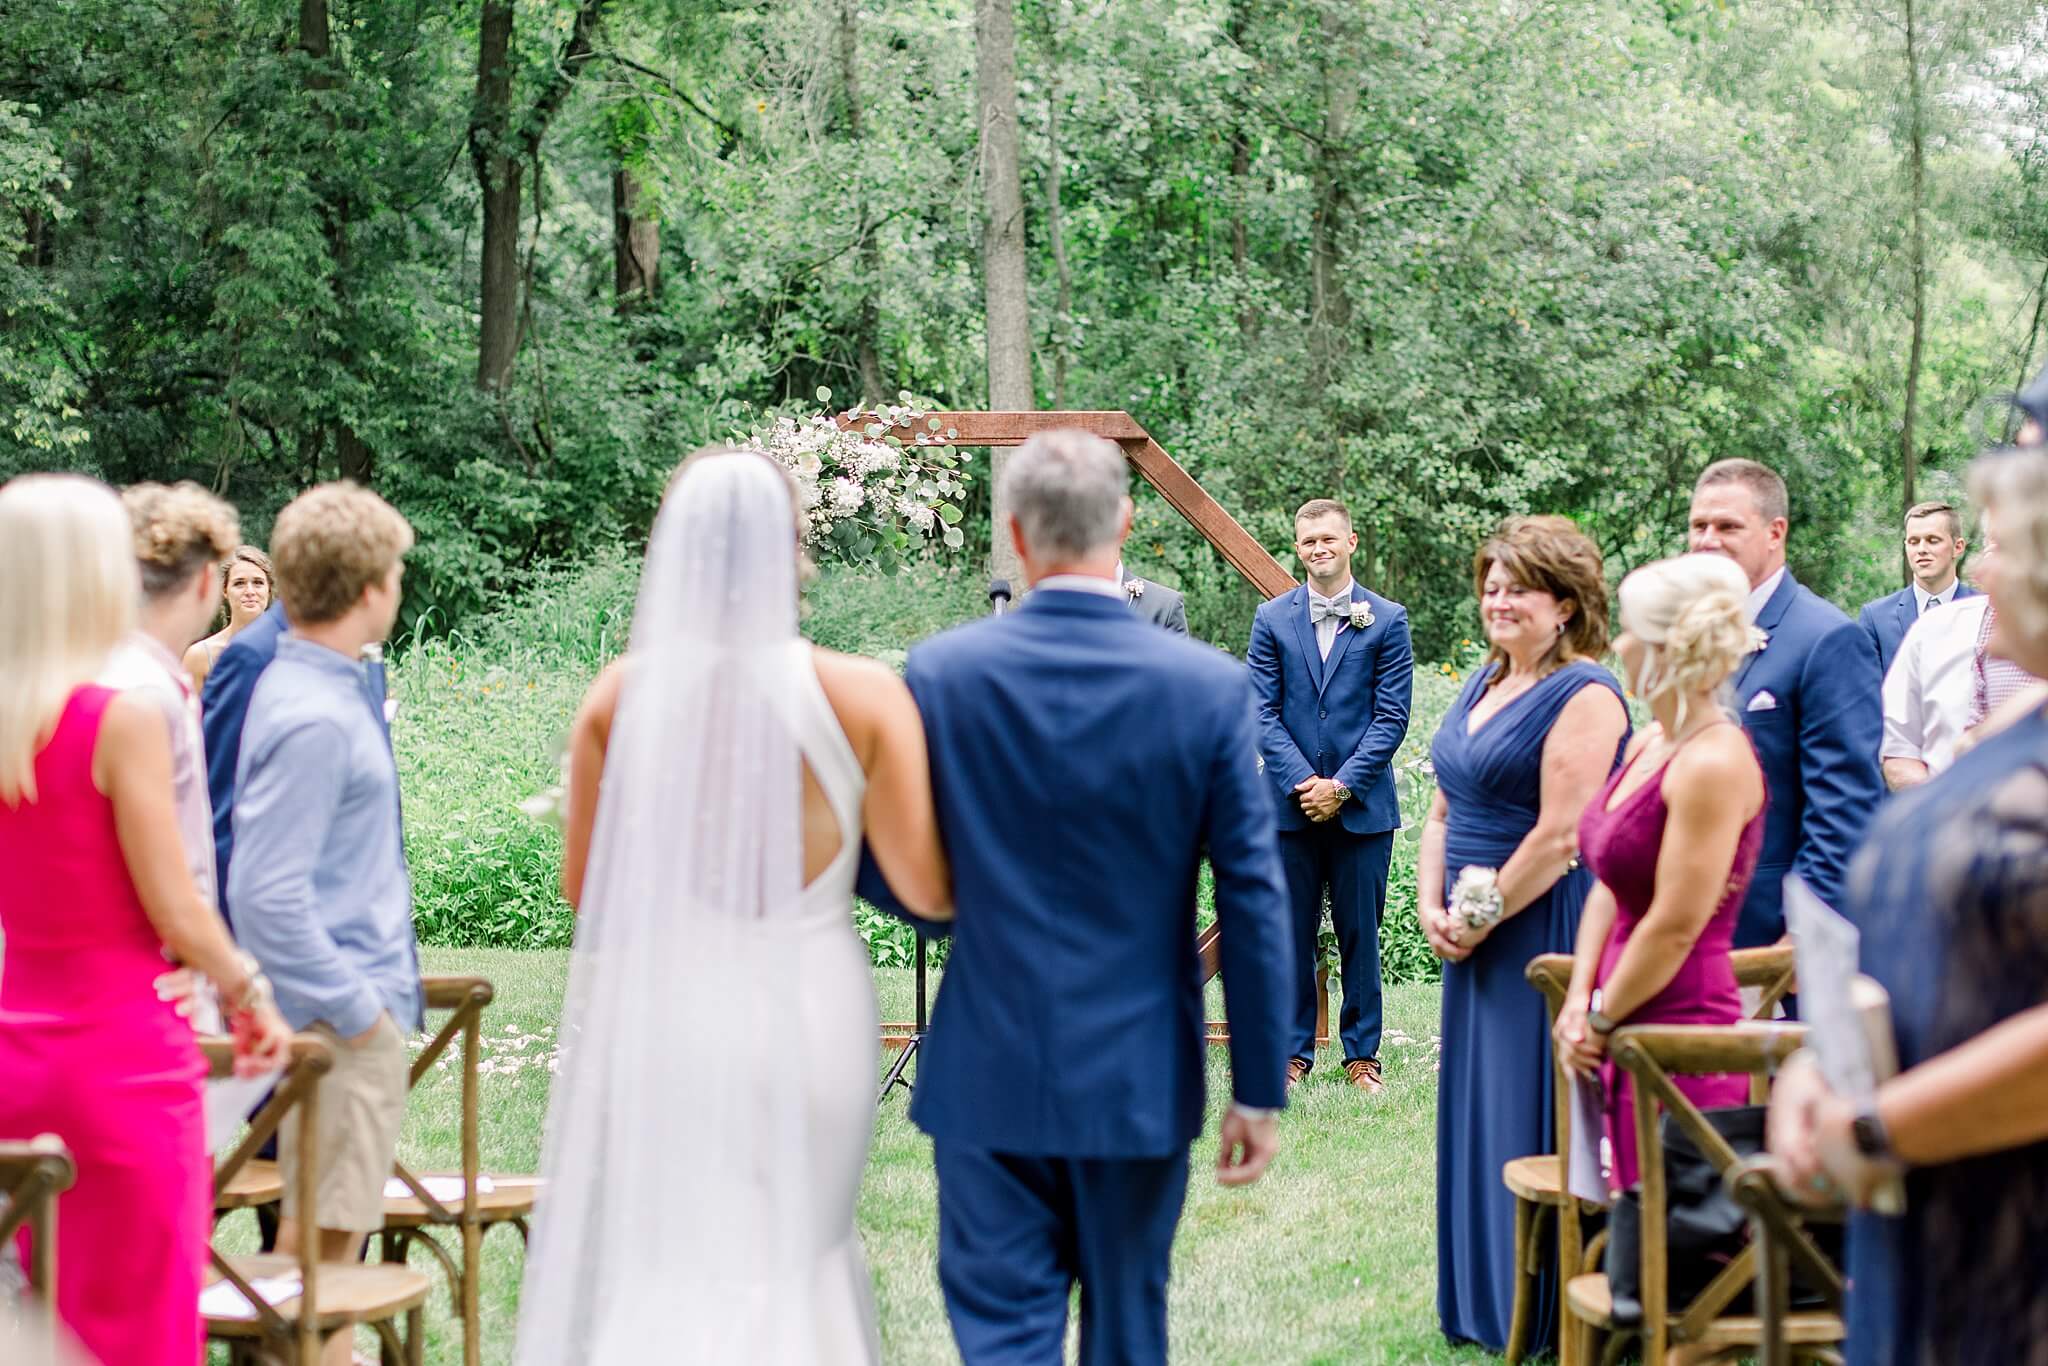 Groom smiles as his bride walks down the aisle with her dad during their summer backyard wedding in Northern Michigan.